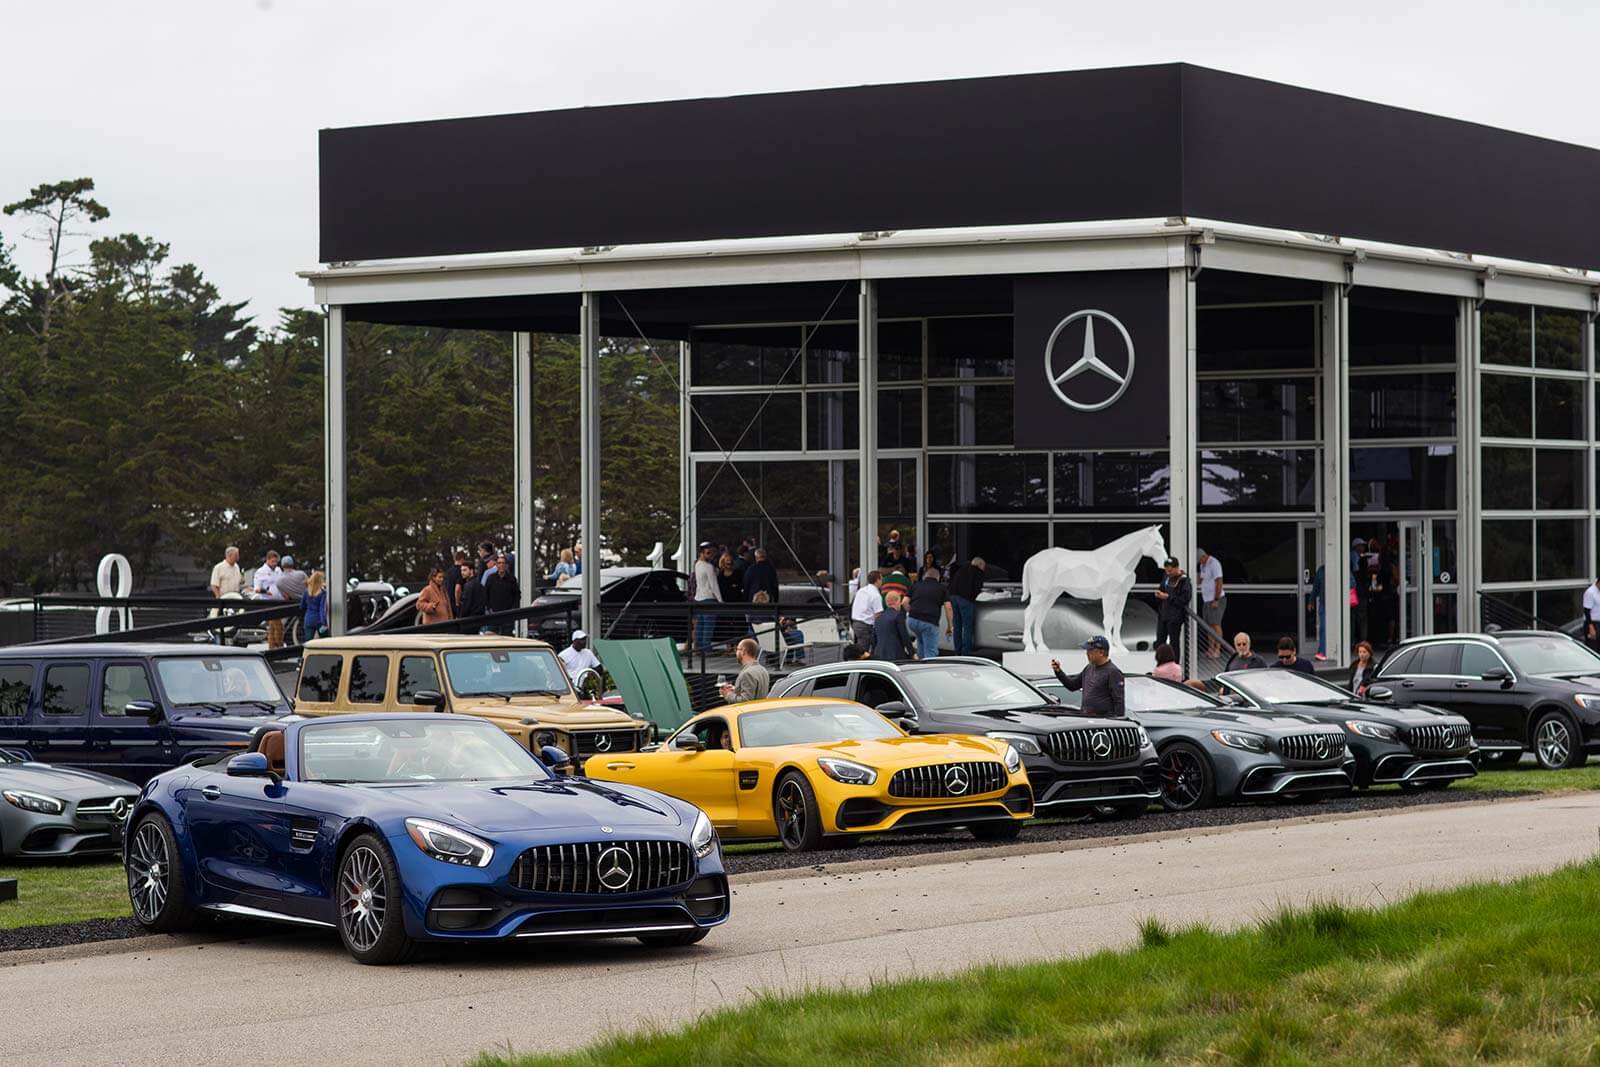 Mercedes display at the Pebble Beach Concours d'Elegance